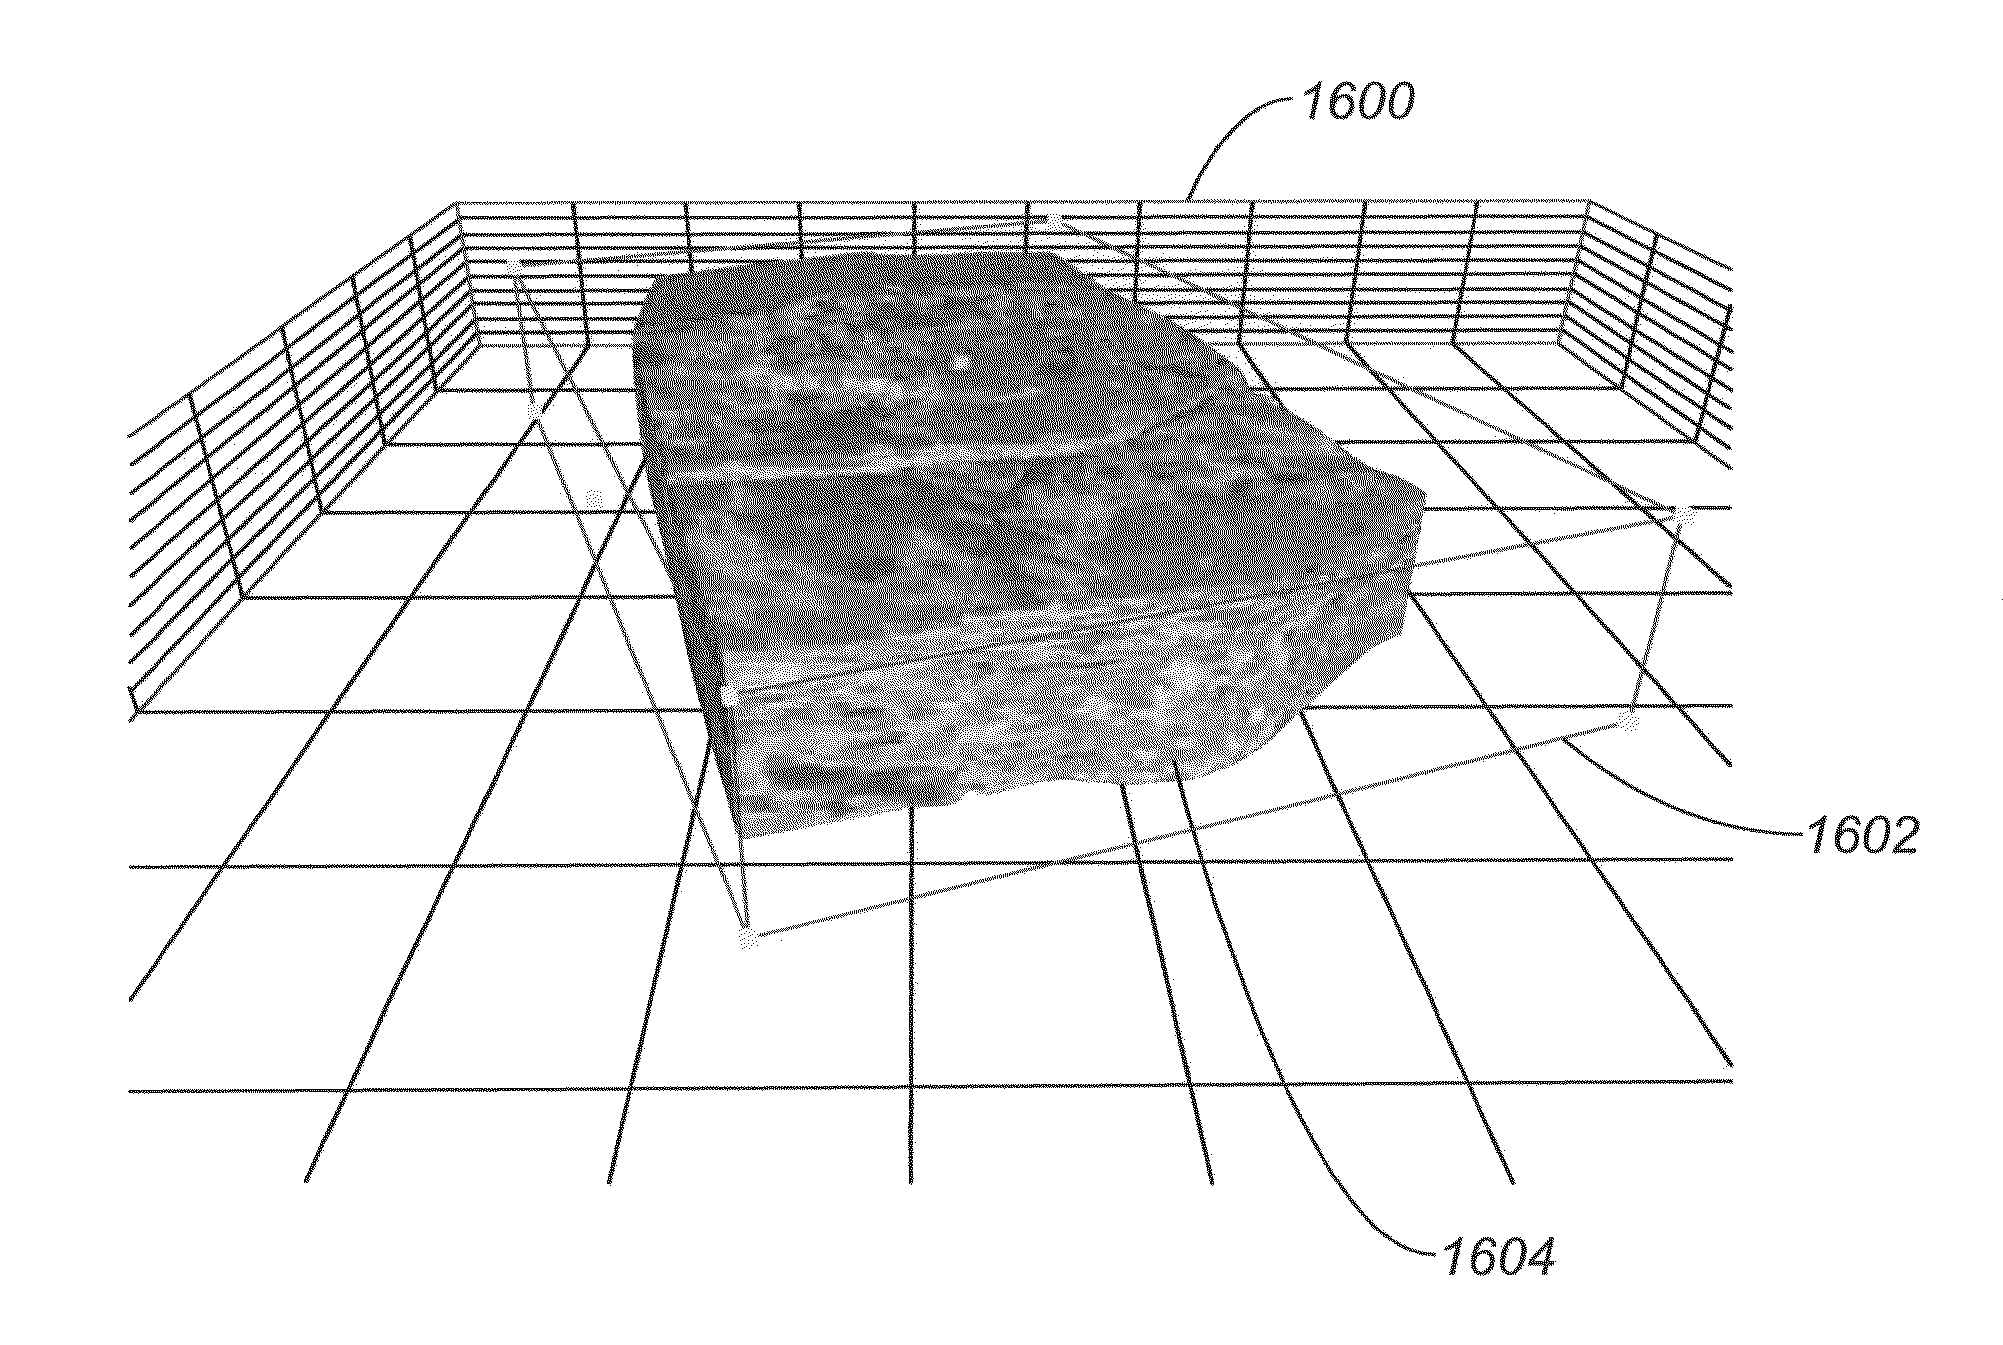 Systems and Methods for Imaging a Three-Dimensional Volume of Geometrically Irregular Grid Data Representing a Grid Volume